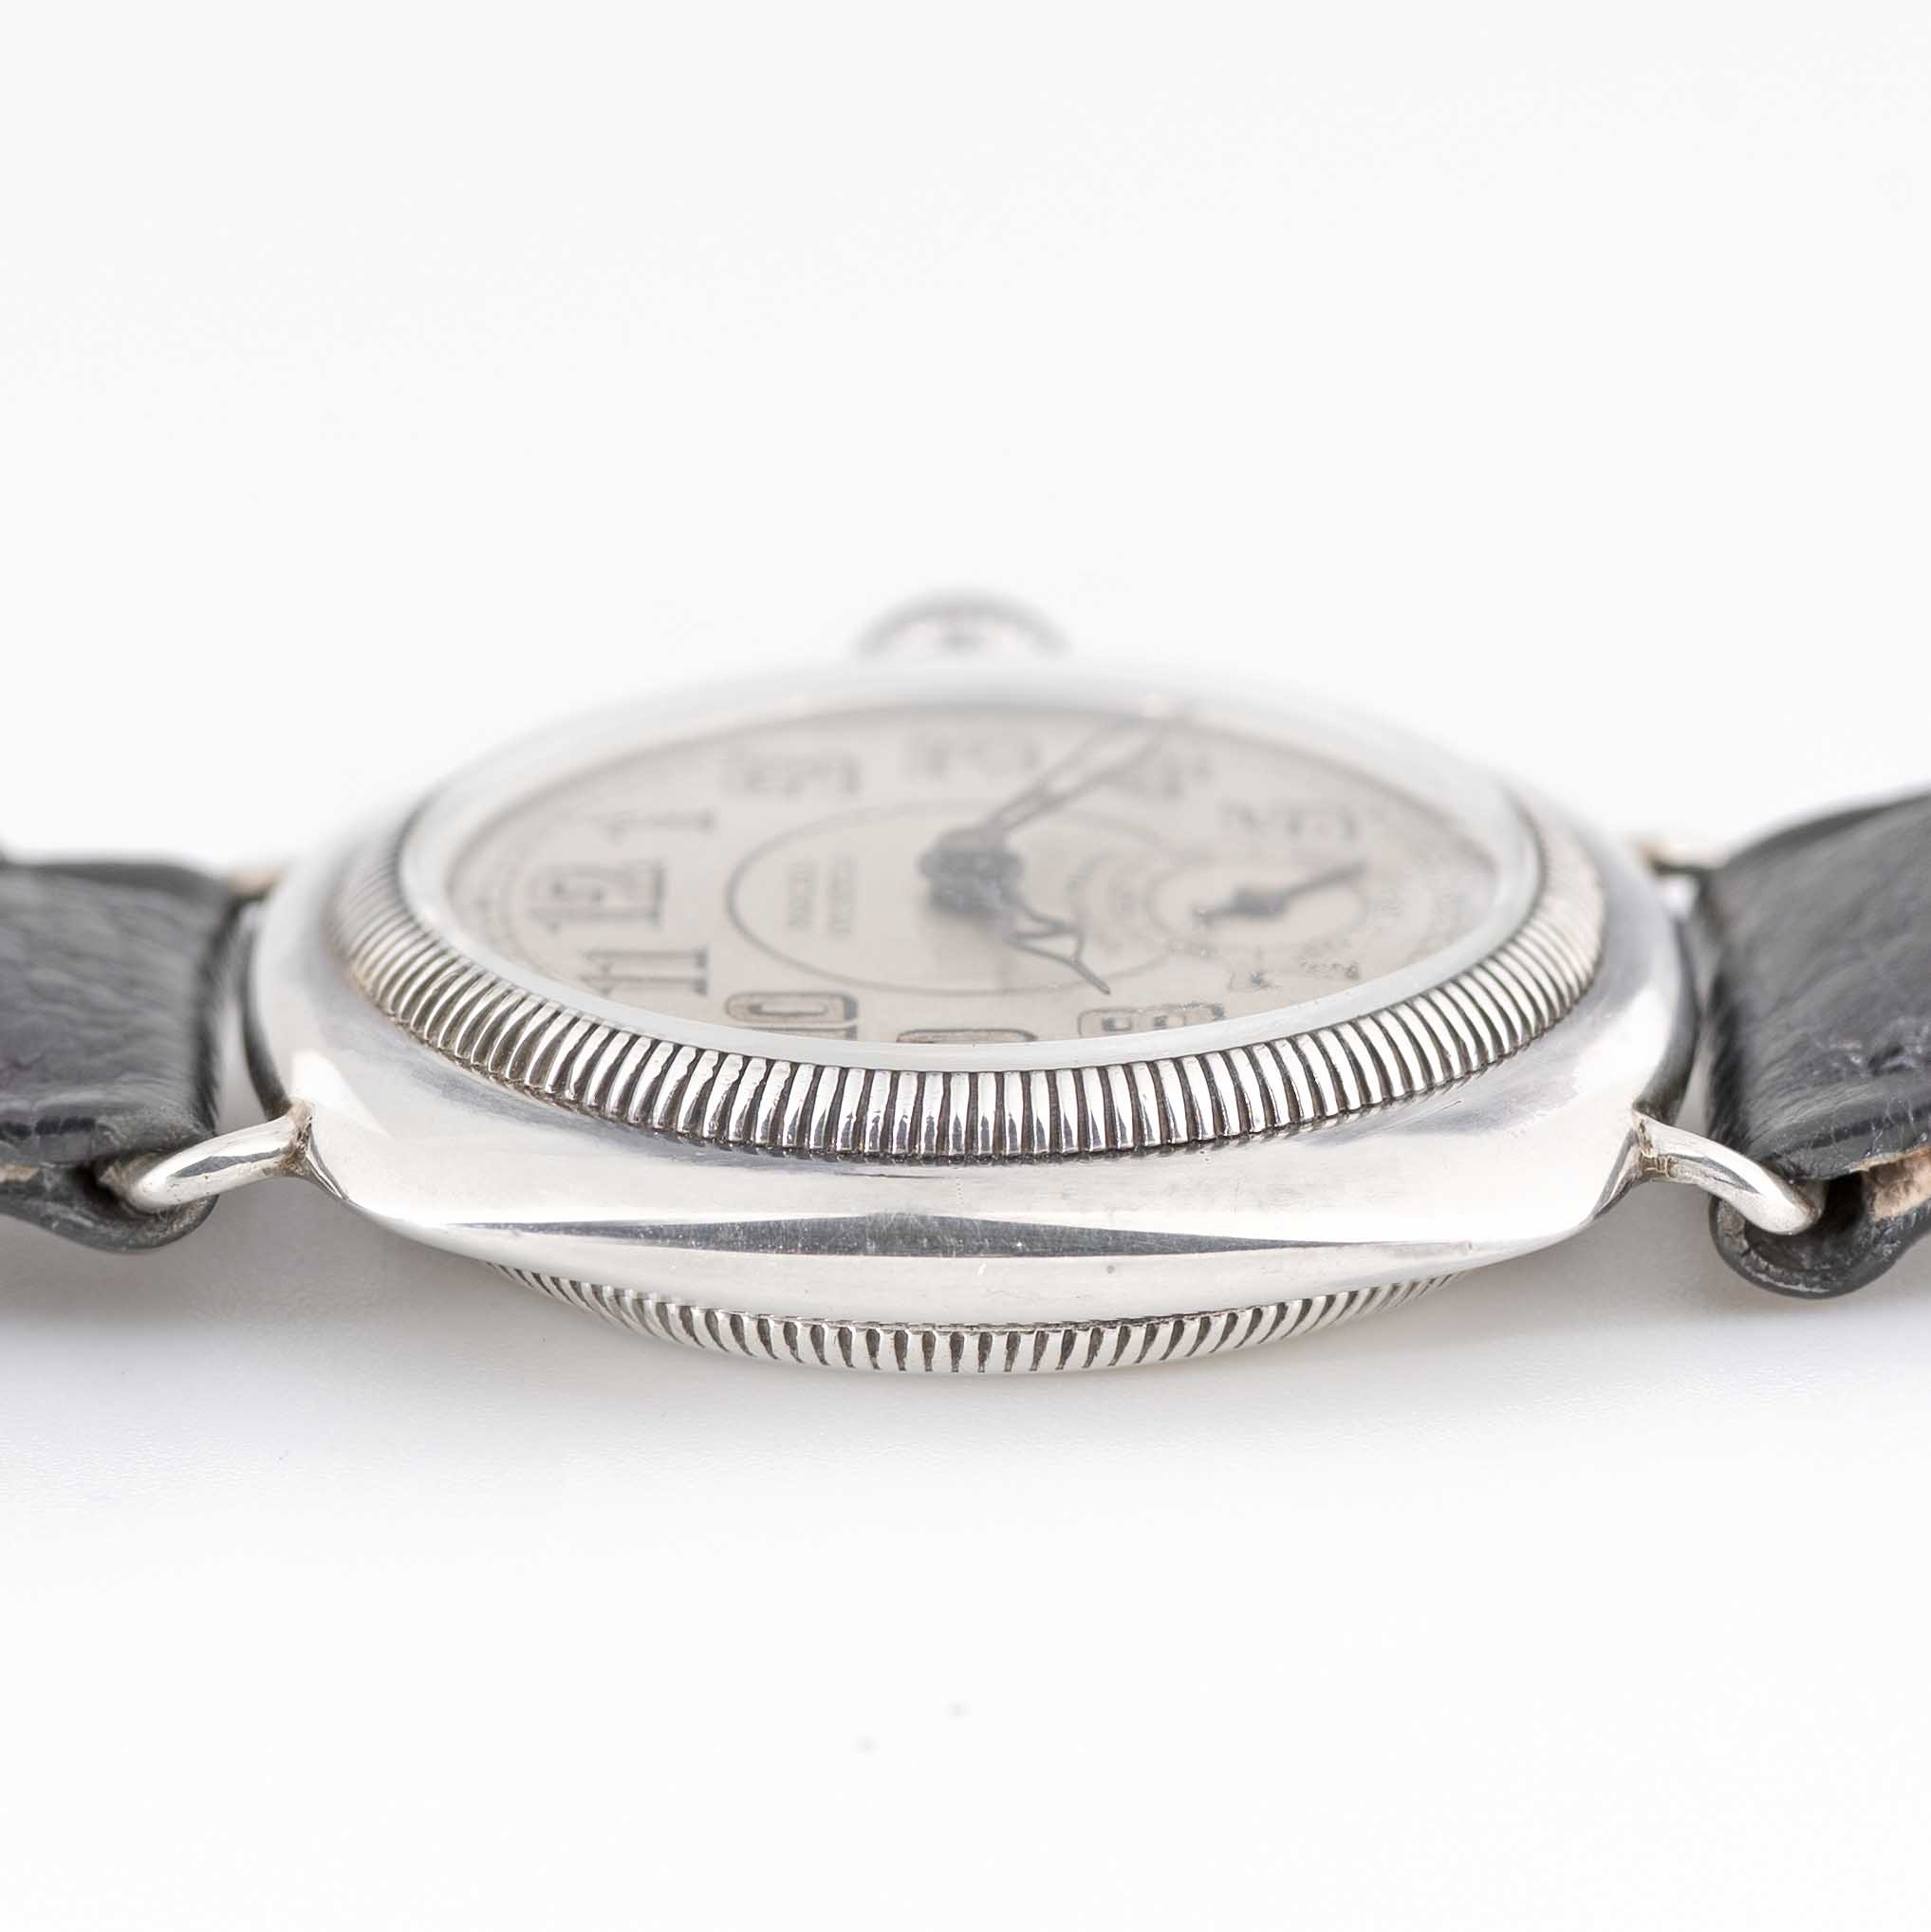 A GENTLEMAN'S SIZE SOLID SILVER ROLEX OYSTER 'CUSHION' WRIST WATCH CIRCA 1931, REF. 6753 Movement: - Image 10 of 10